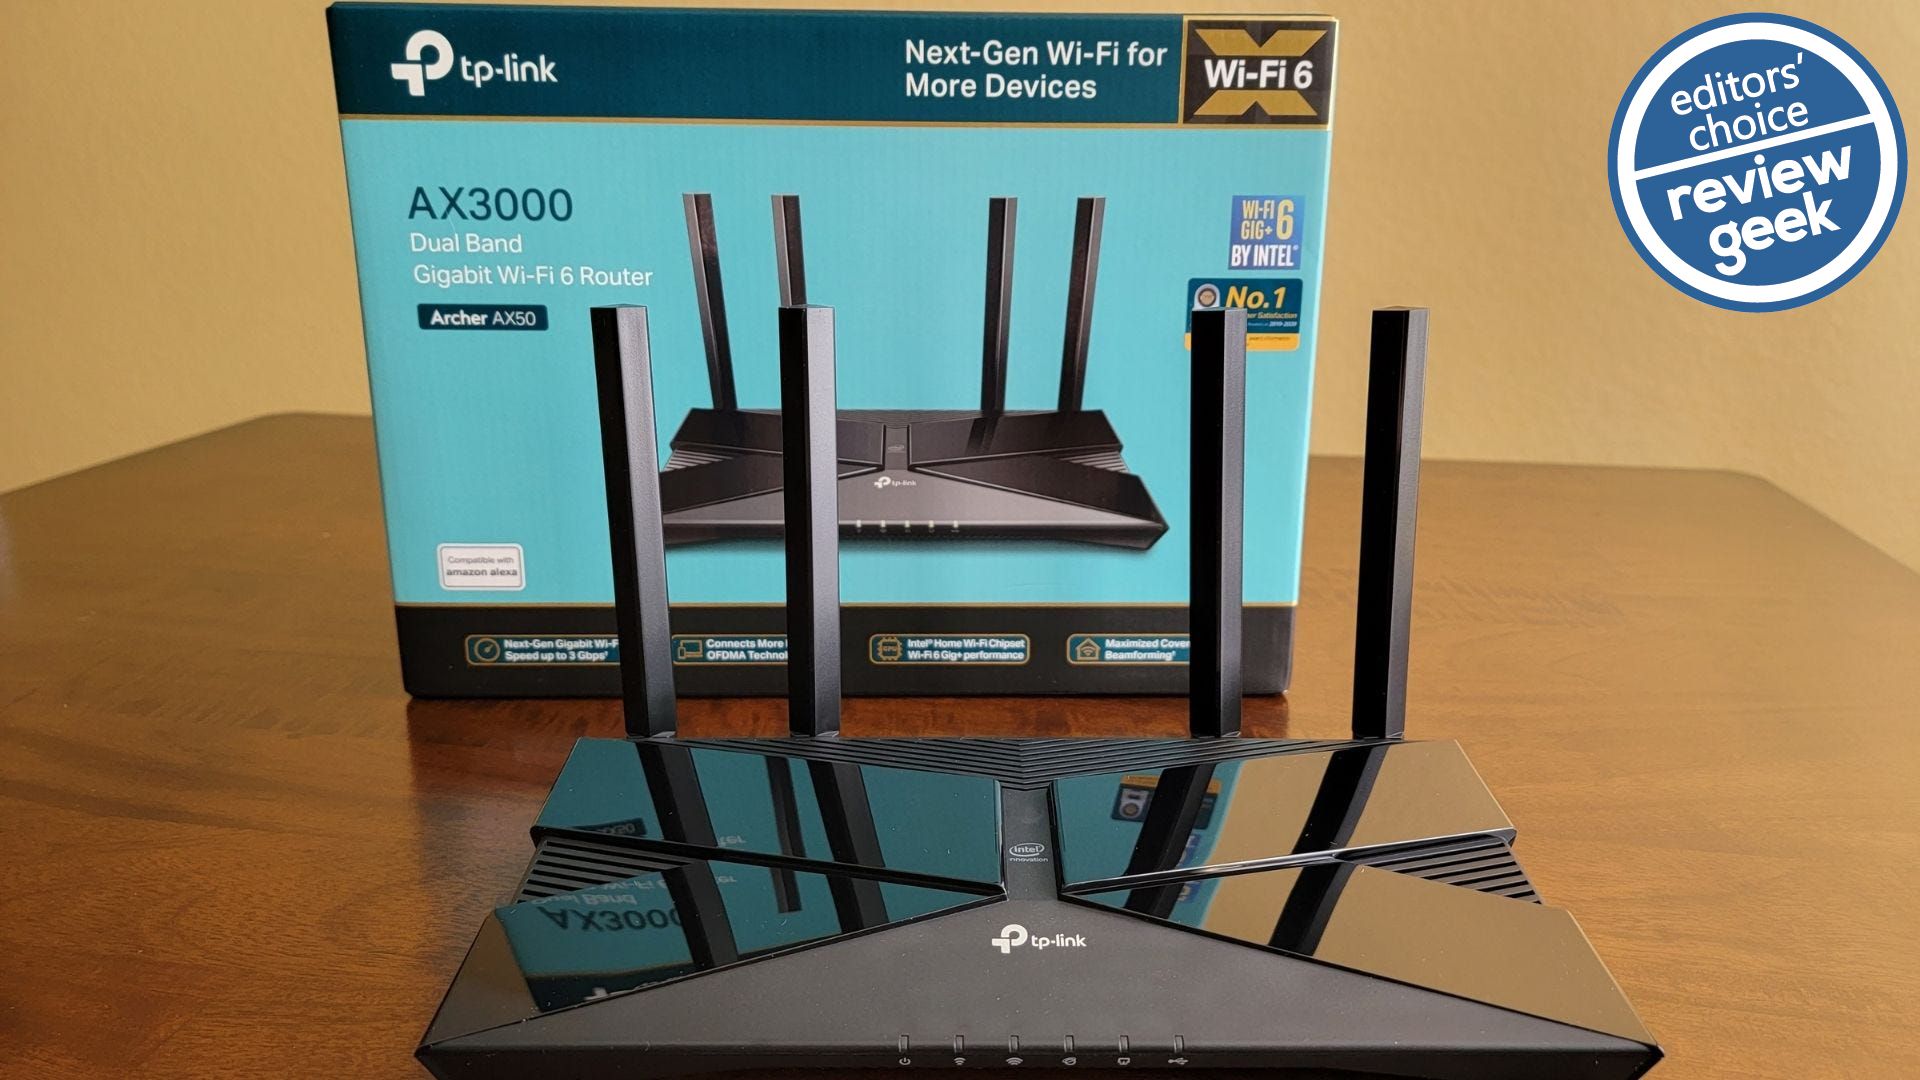 TP-Link Archer AX50 (AX3000) Dual Band Gigabit Wi-Fi 6 Router Review